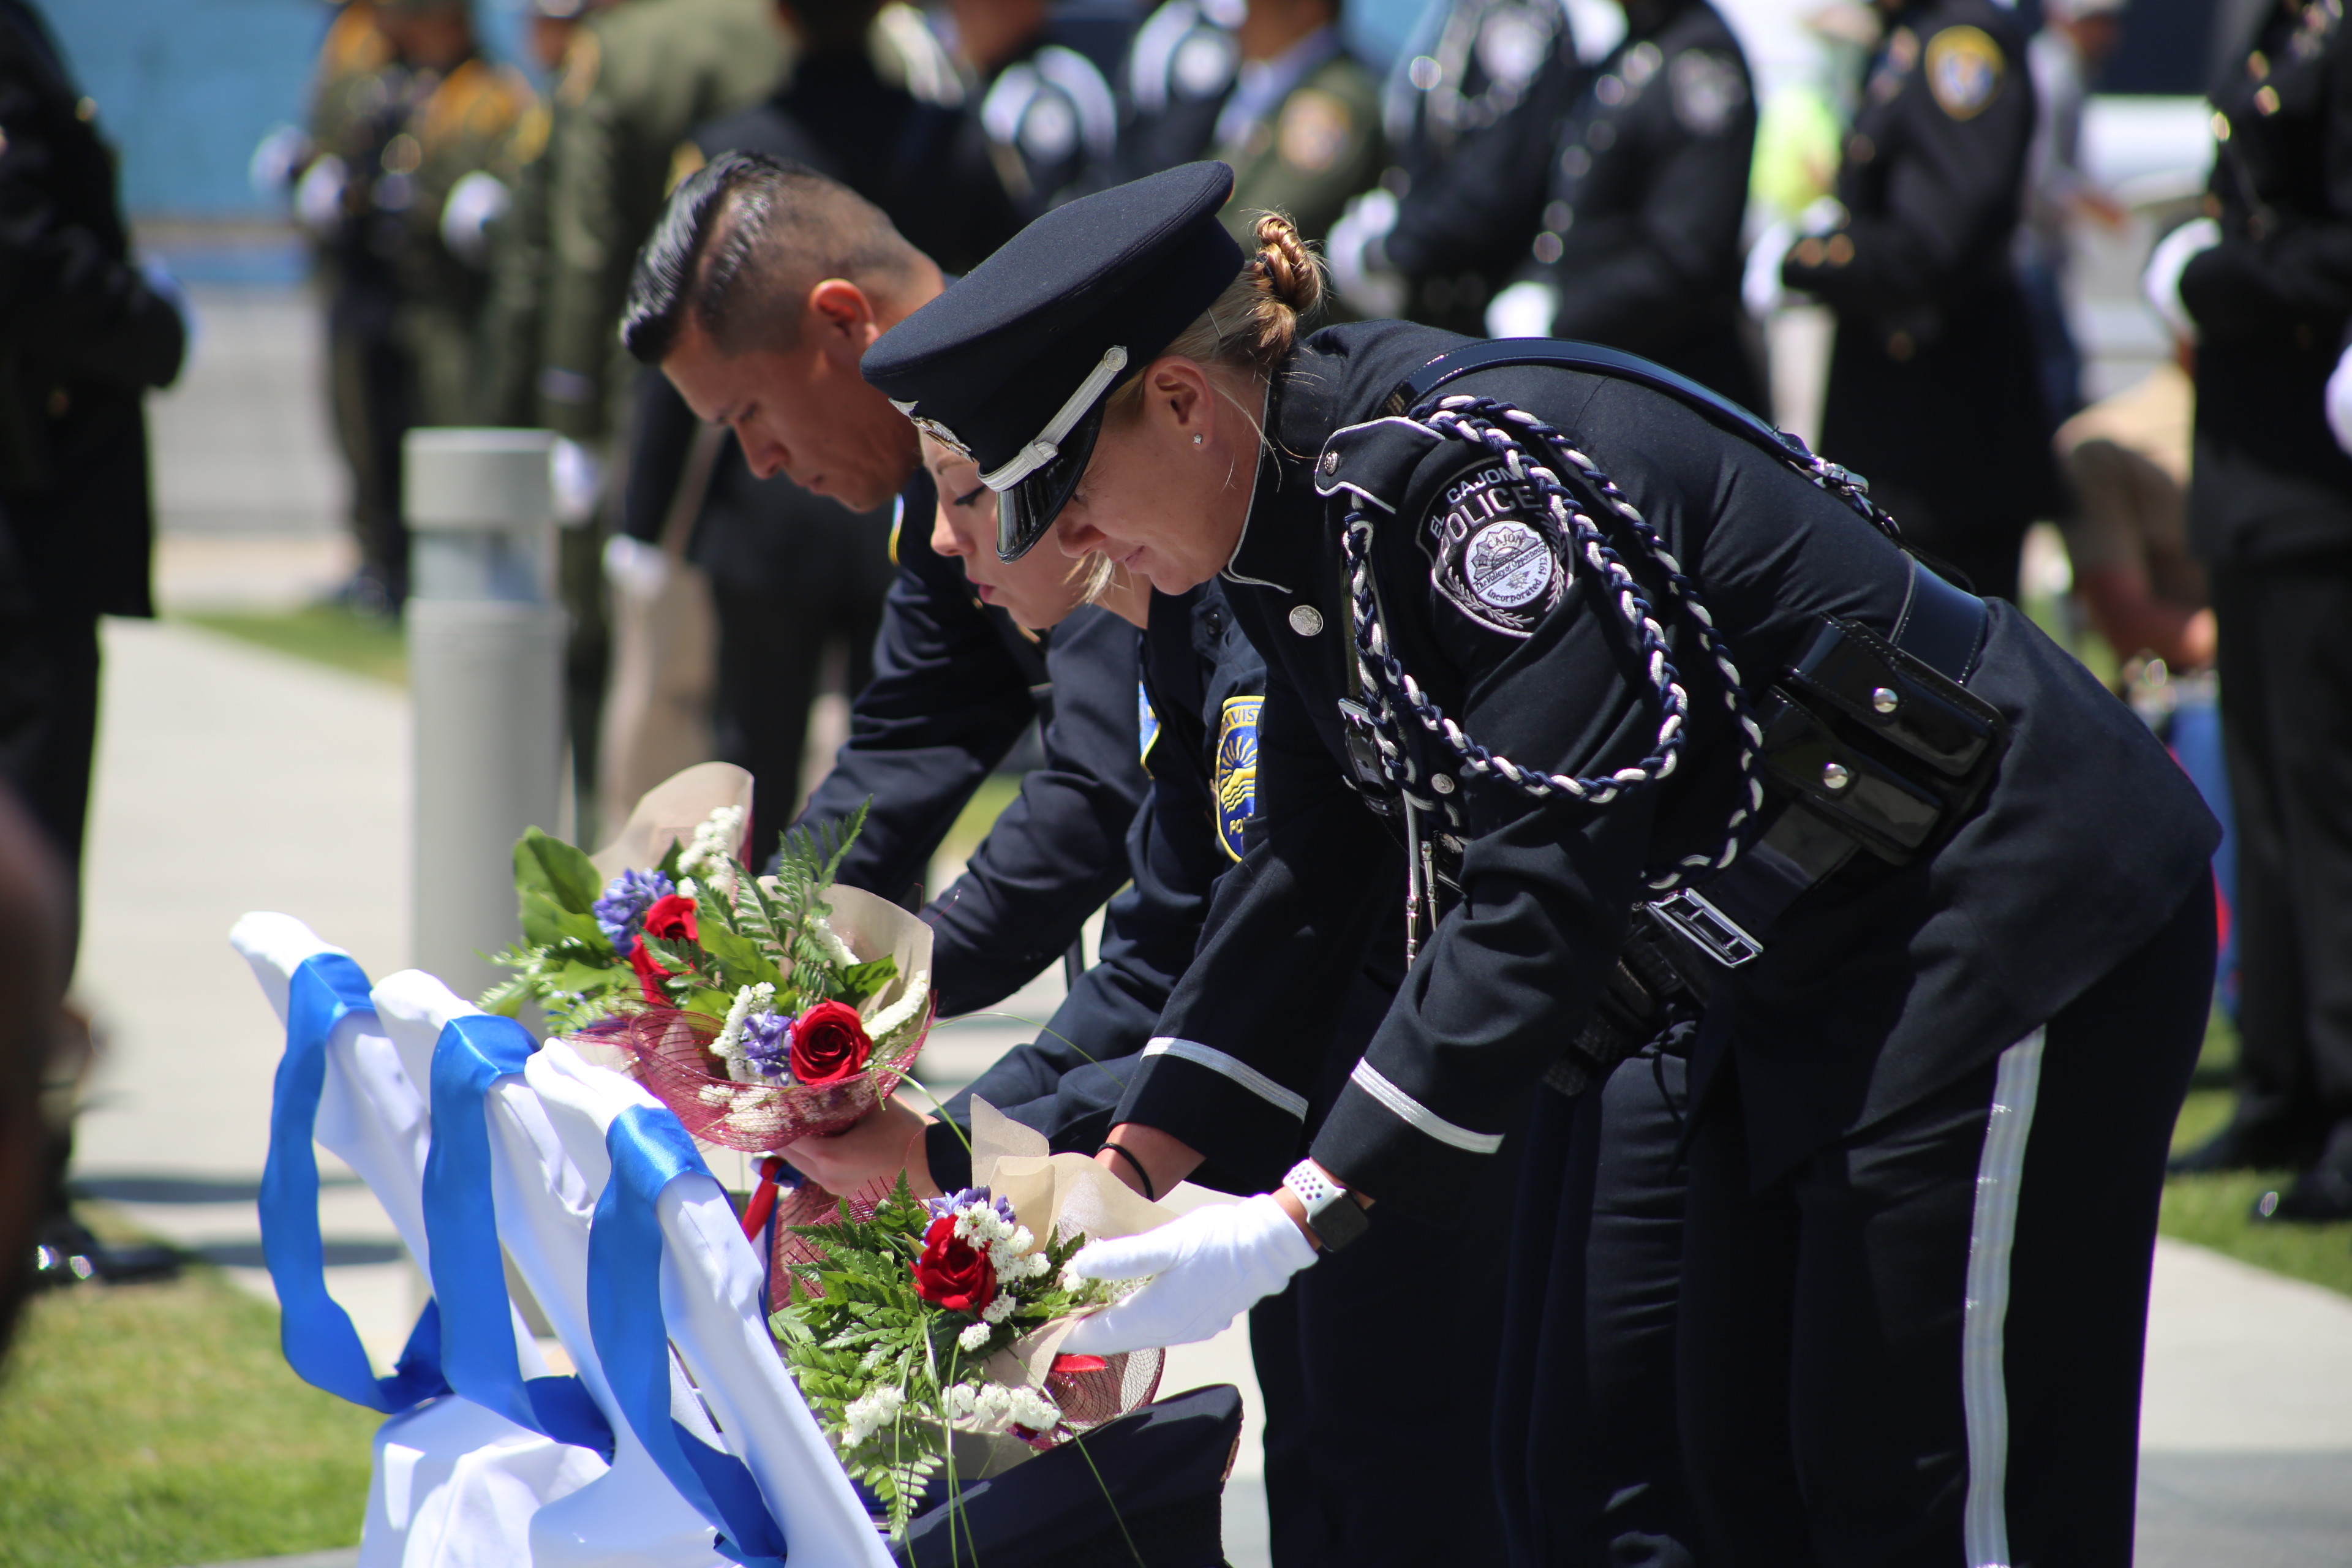 3 uniformed officers leave flowers on empty chairs